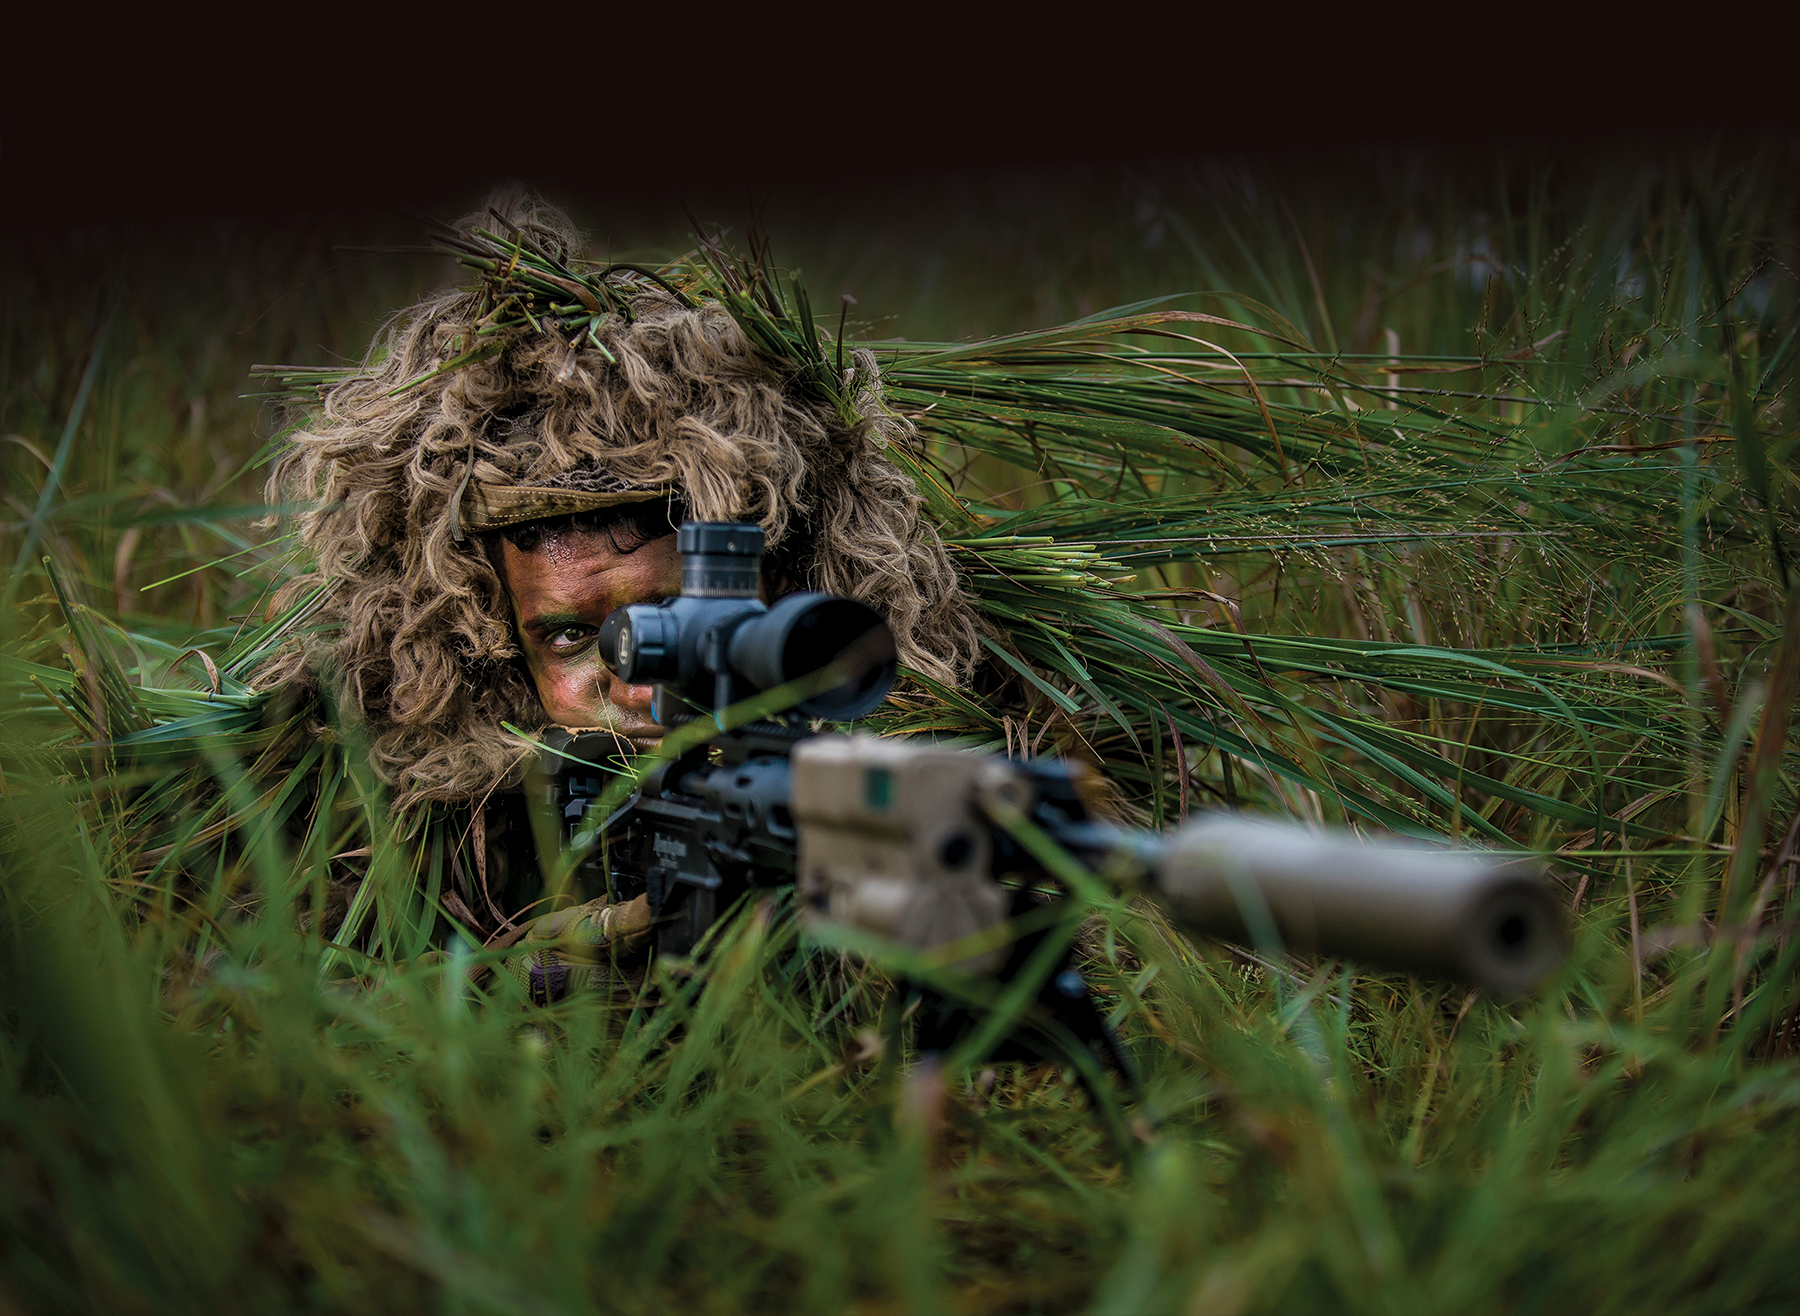 Photo of Sgt. Ian Rivera-Aponte, U.S. Army Reserve sniper and infantryman 26 July 2017 at Joint Base McGuire-Dix-Lakehurst, New Jersey. (Photo by Master Sgt. Michel Sauret, U.S. Army Reserve)